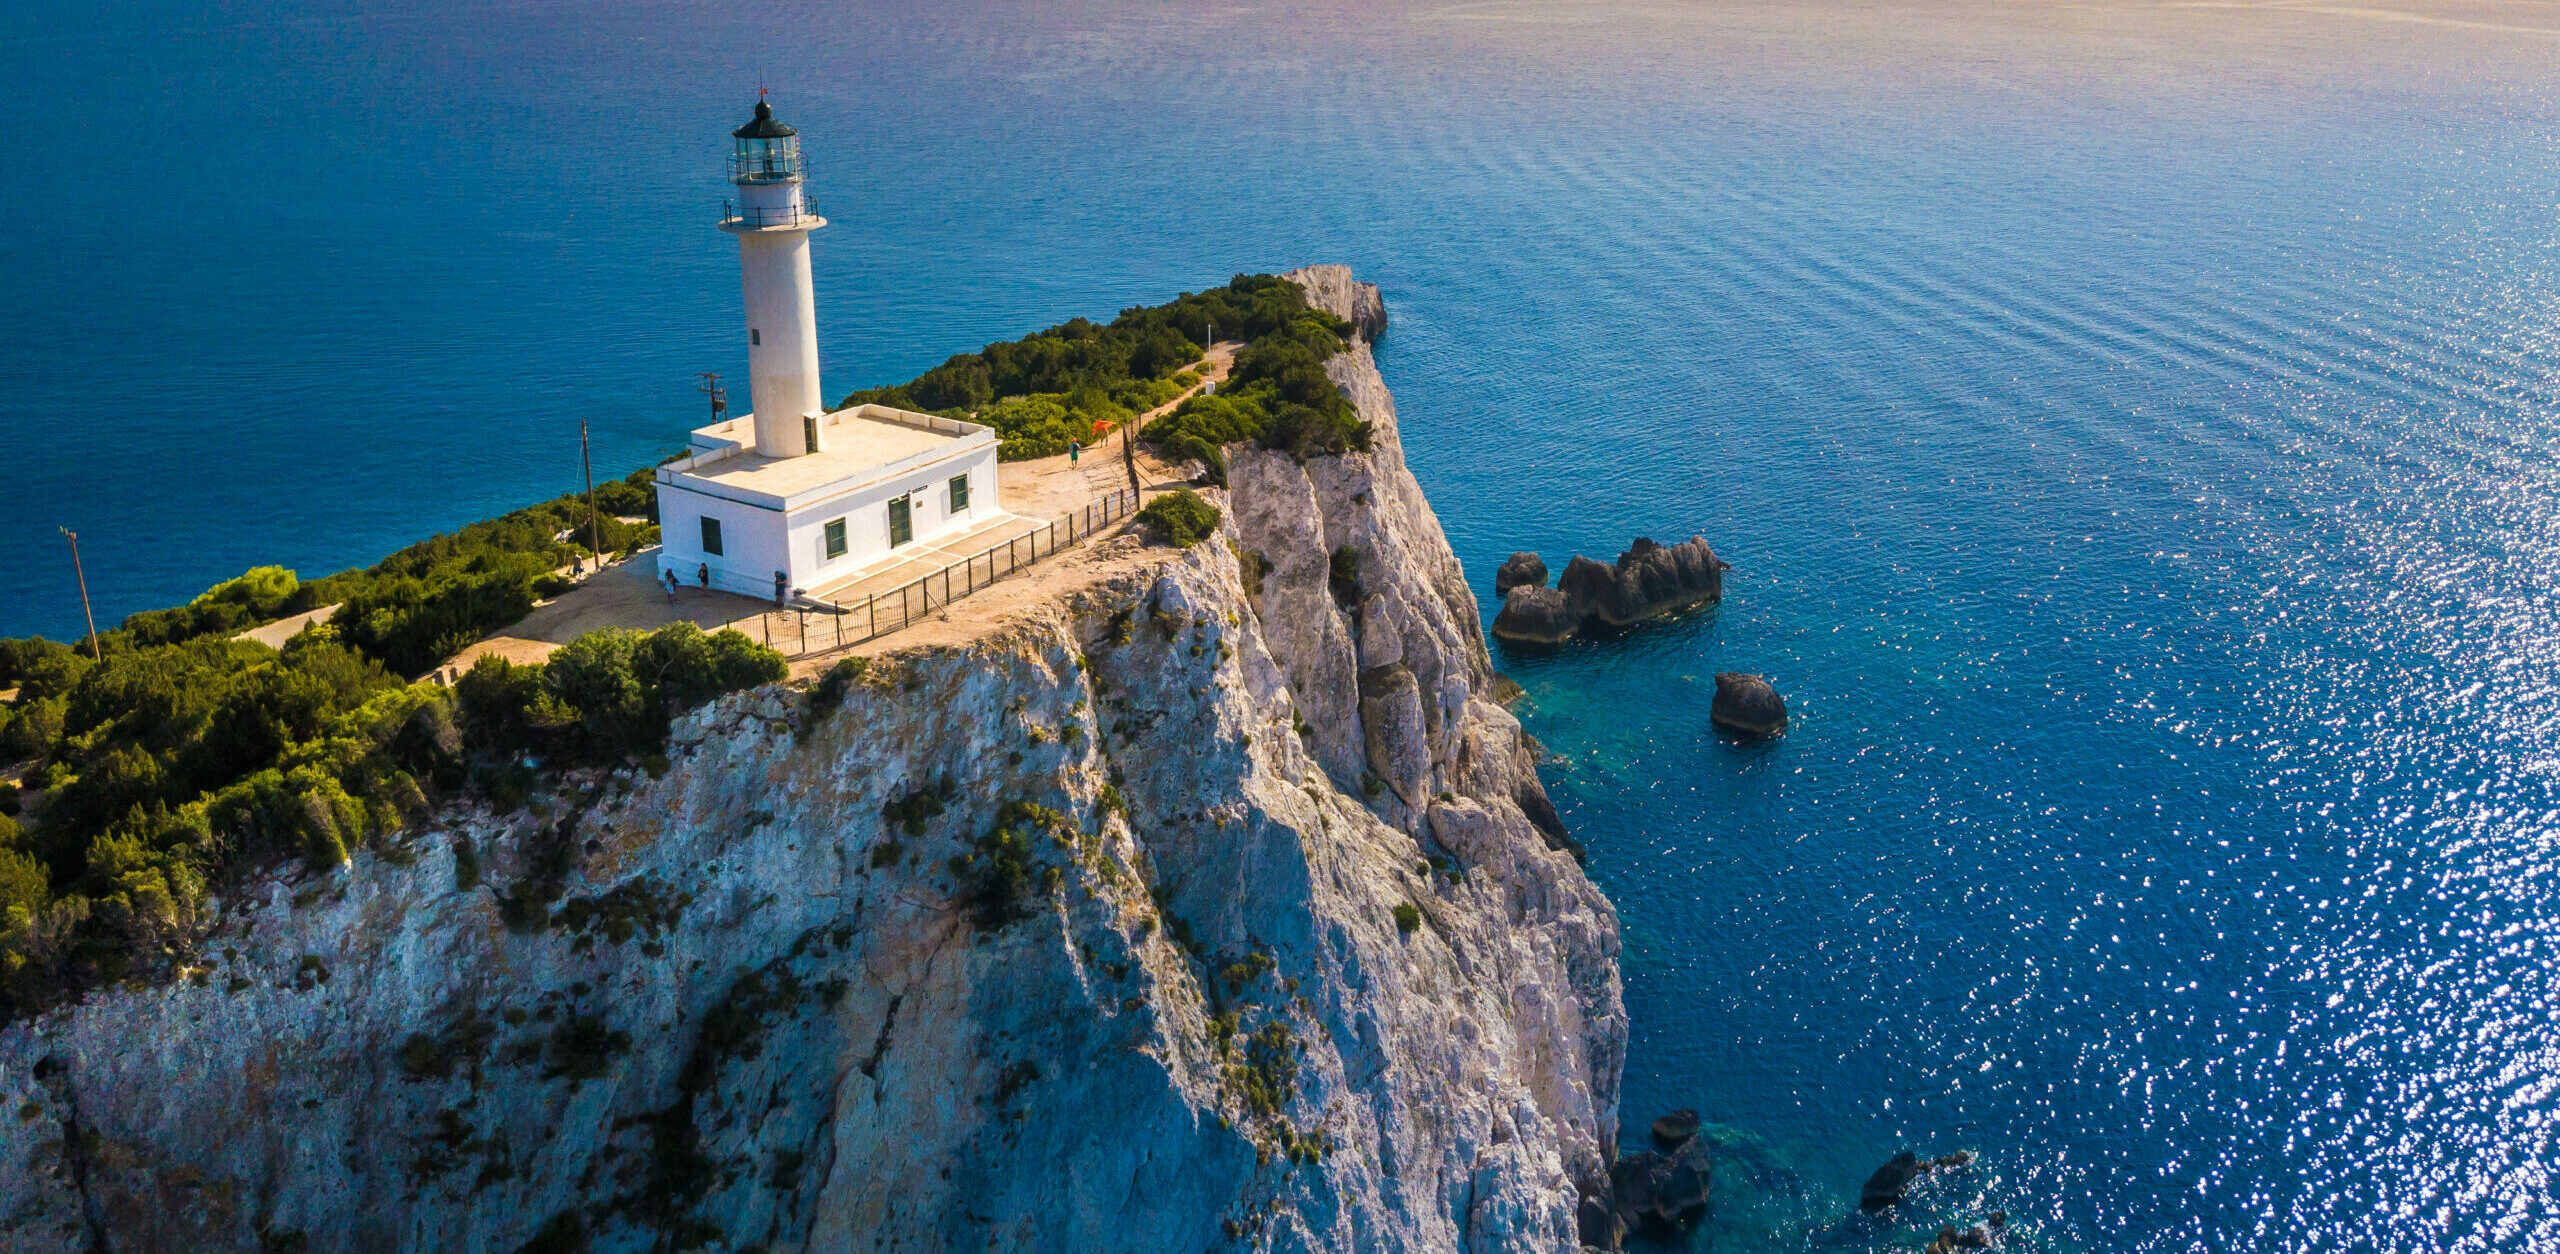 Lefkada: Doukato, the lighthouse of Greece and the mysterious legend of lovers